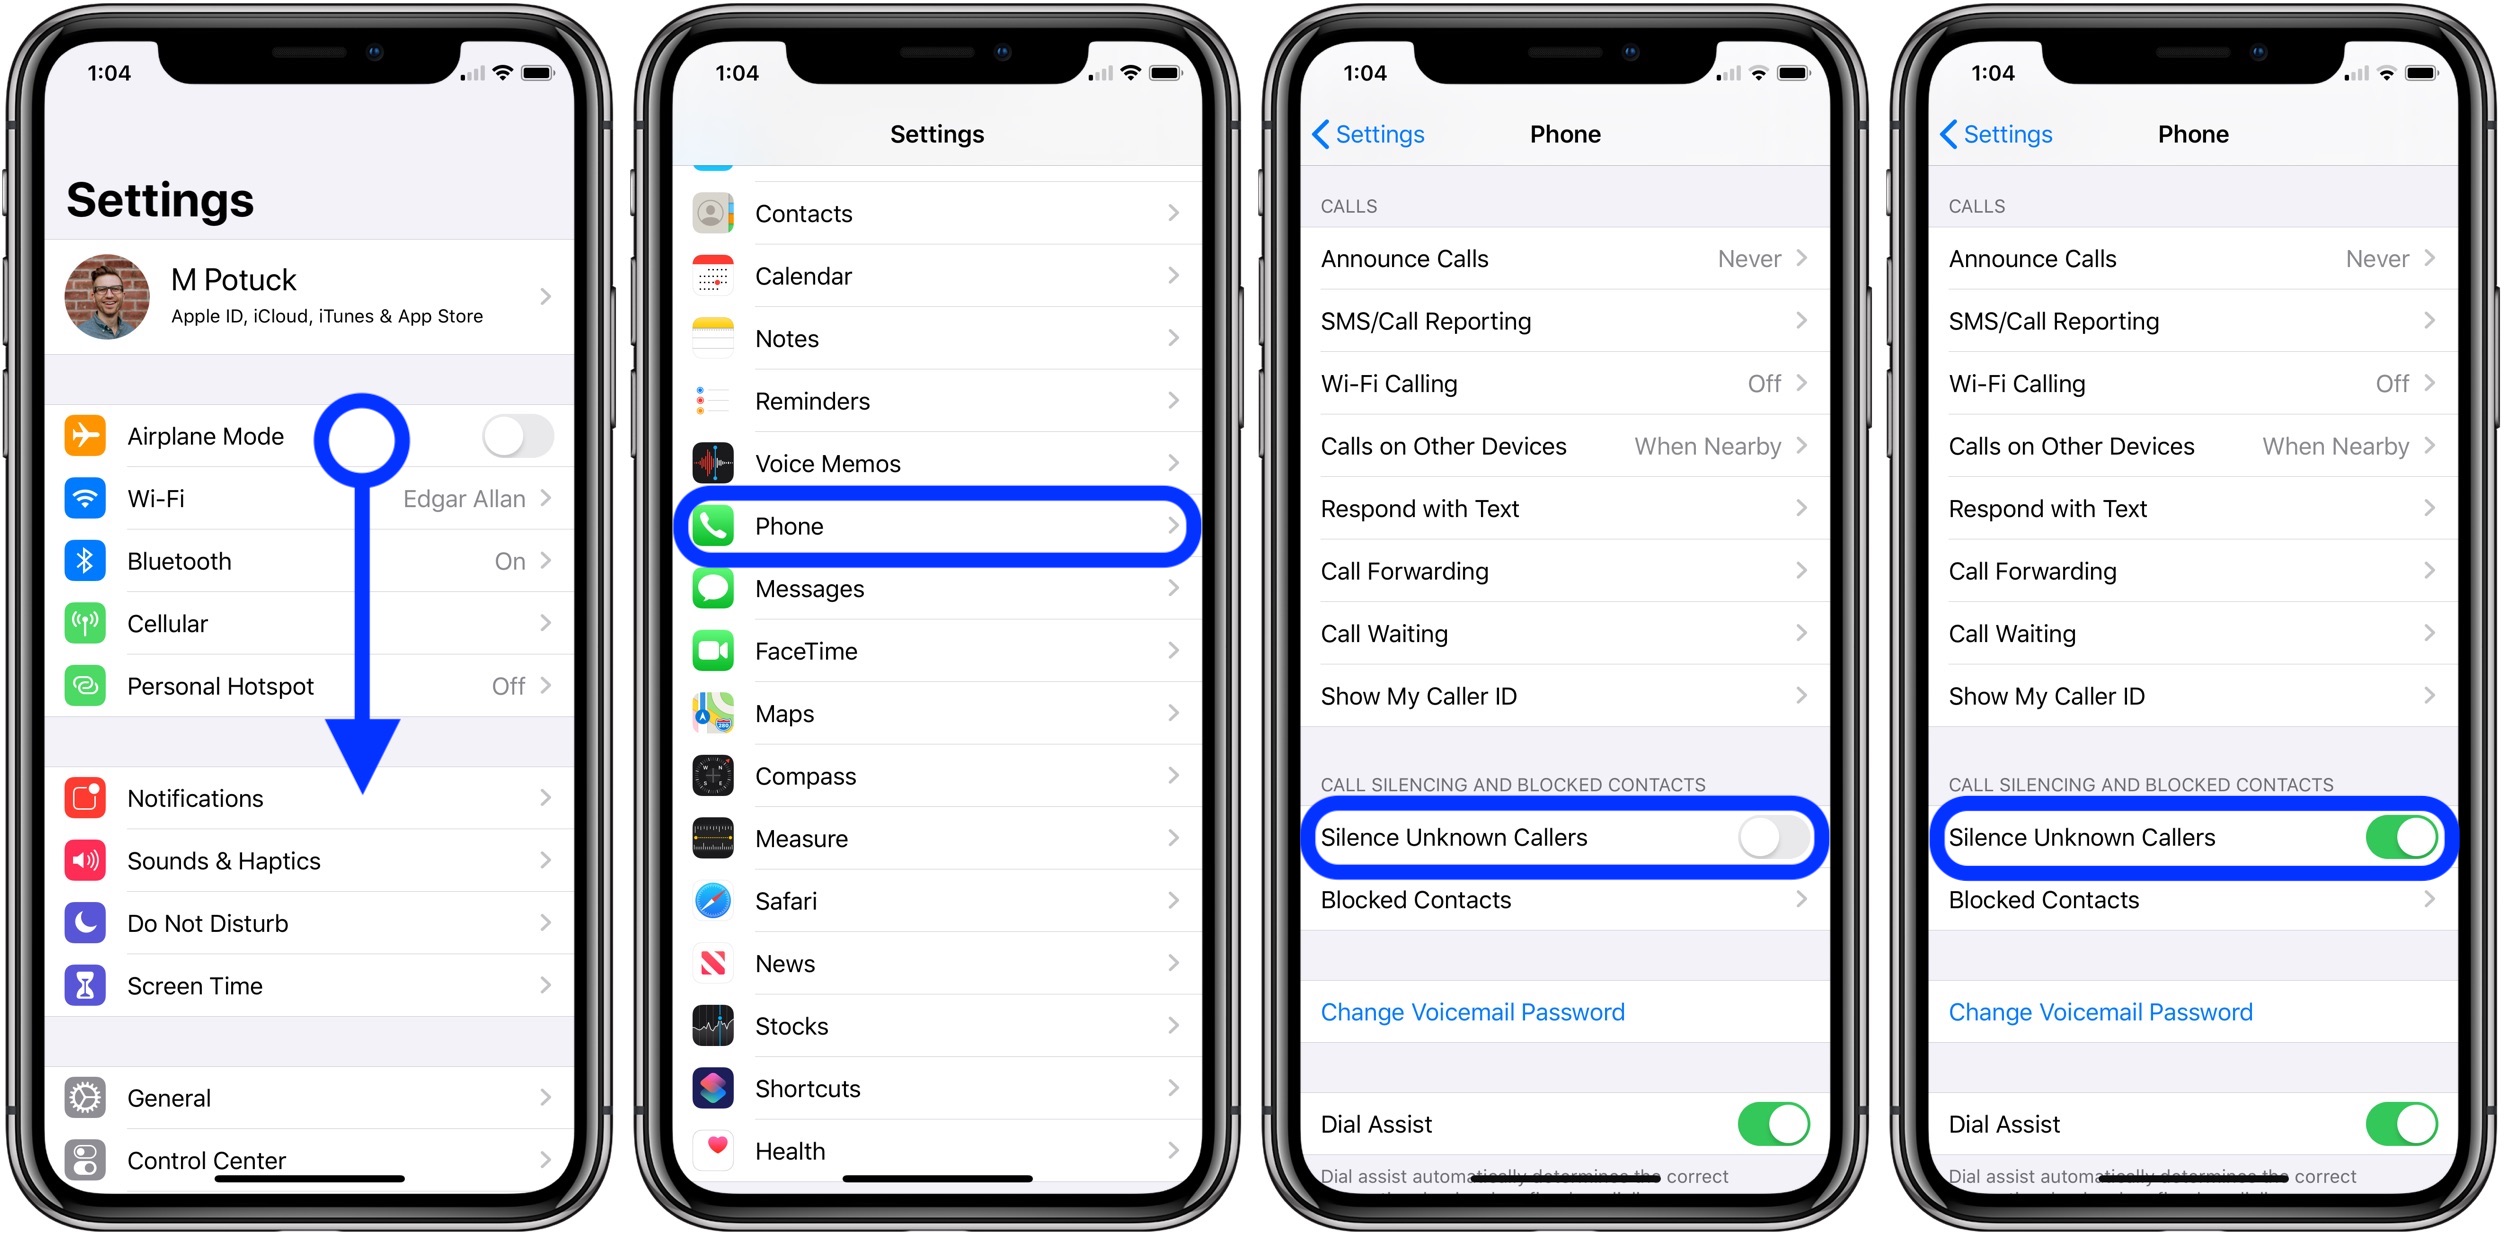 How to automatically silence unknown calls on iPhone in iOS 13